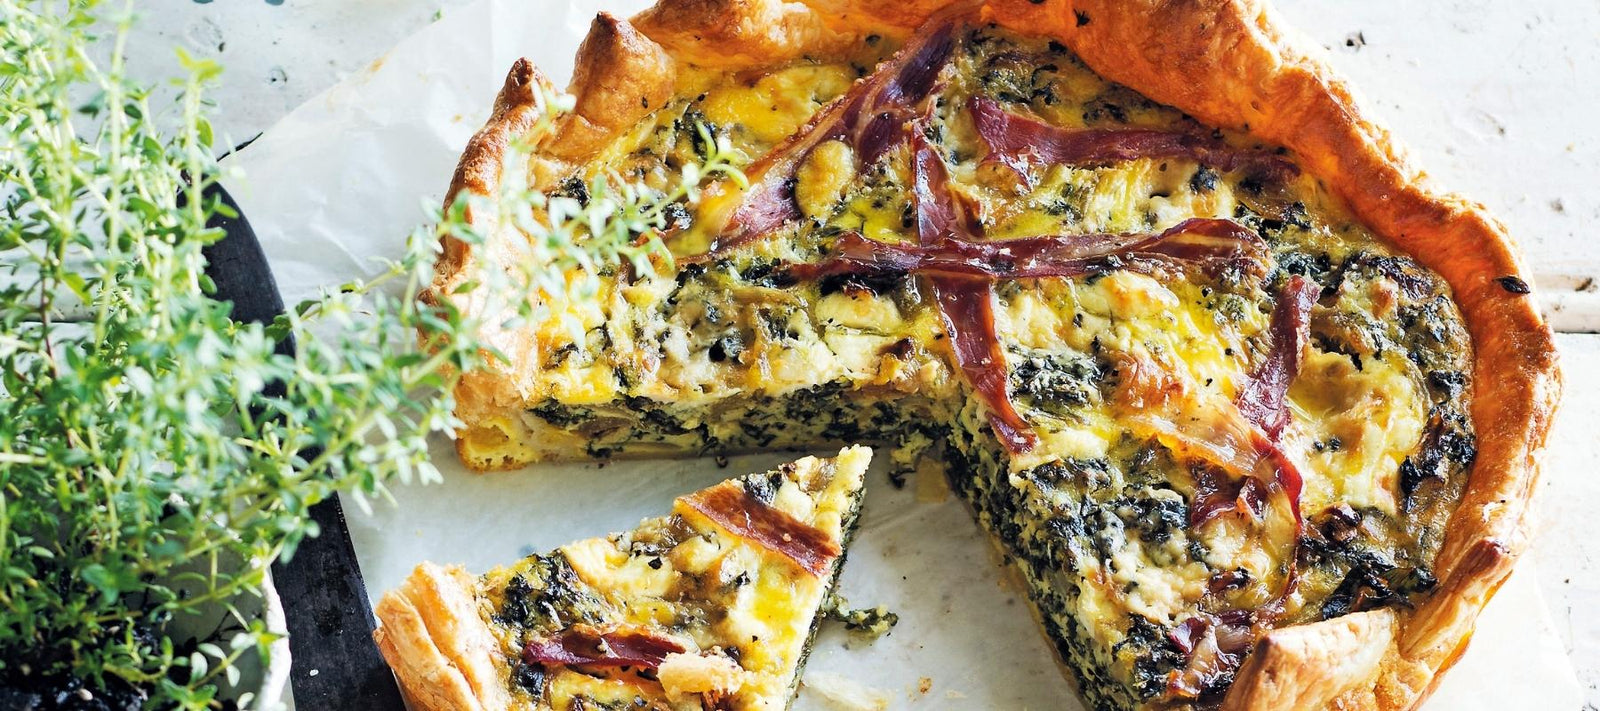 Kale and blue cheese tart - The Diggers Club